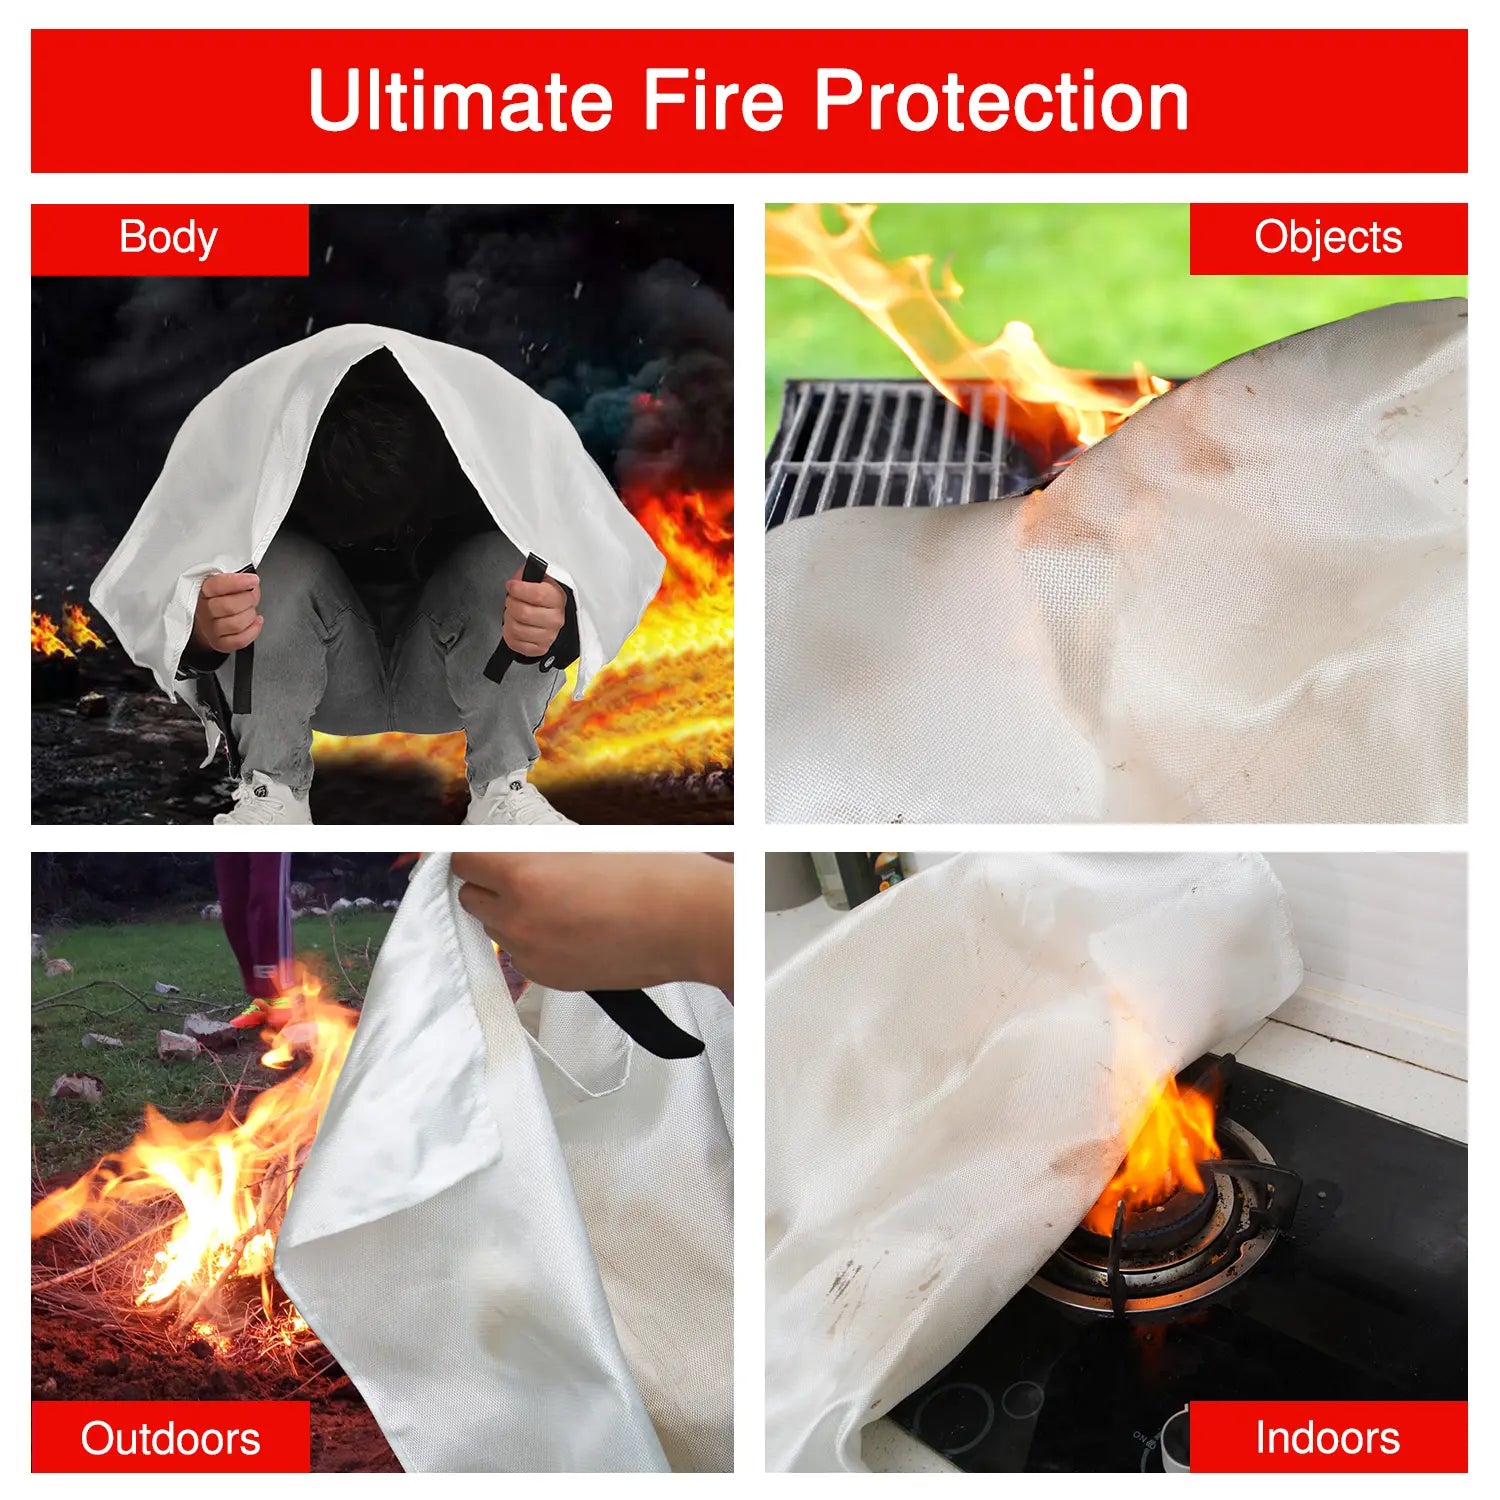 Mart Cobra 2-Pack Fire Blankets for Home Safety - Compact, Easy-to-Use, 40"x40" - Essential Emergency Gear